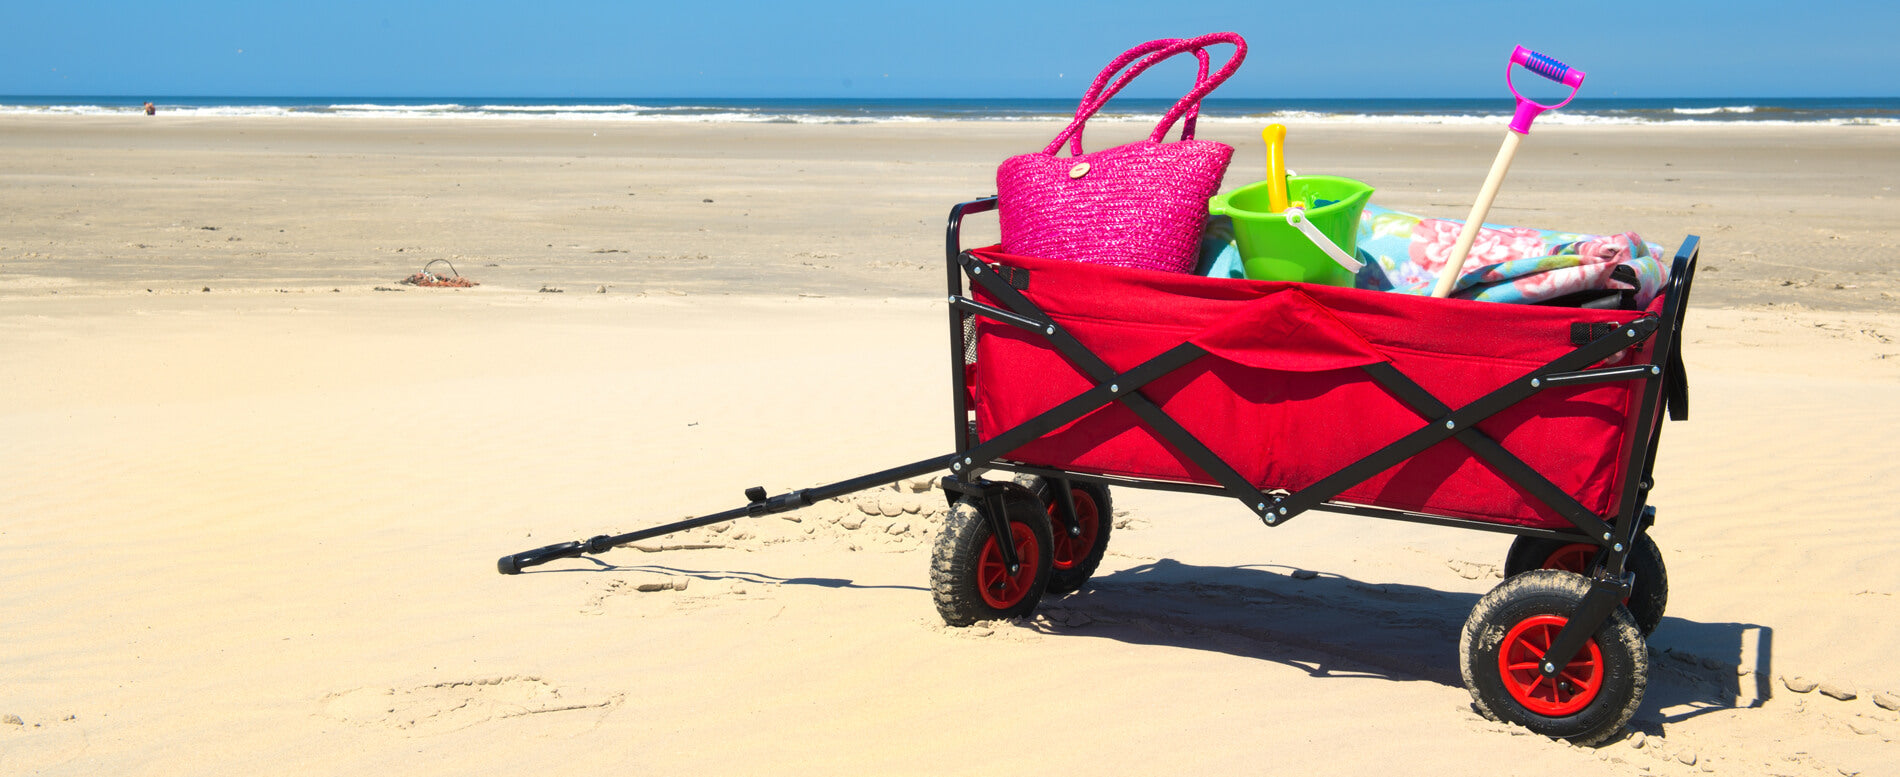 The Best Beach Wagons & Carts For All Budgets - Gili Sports UK